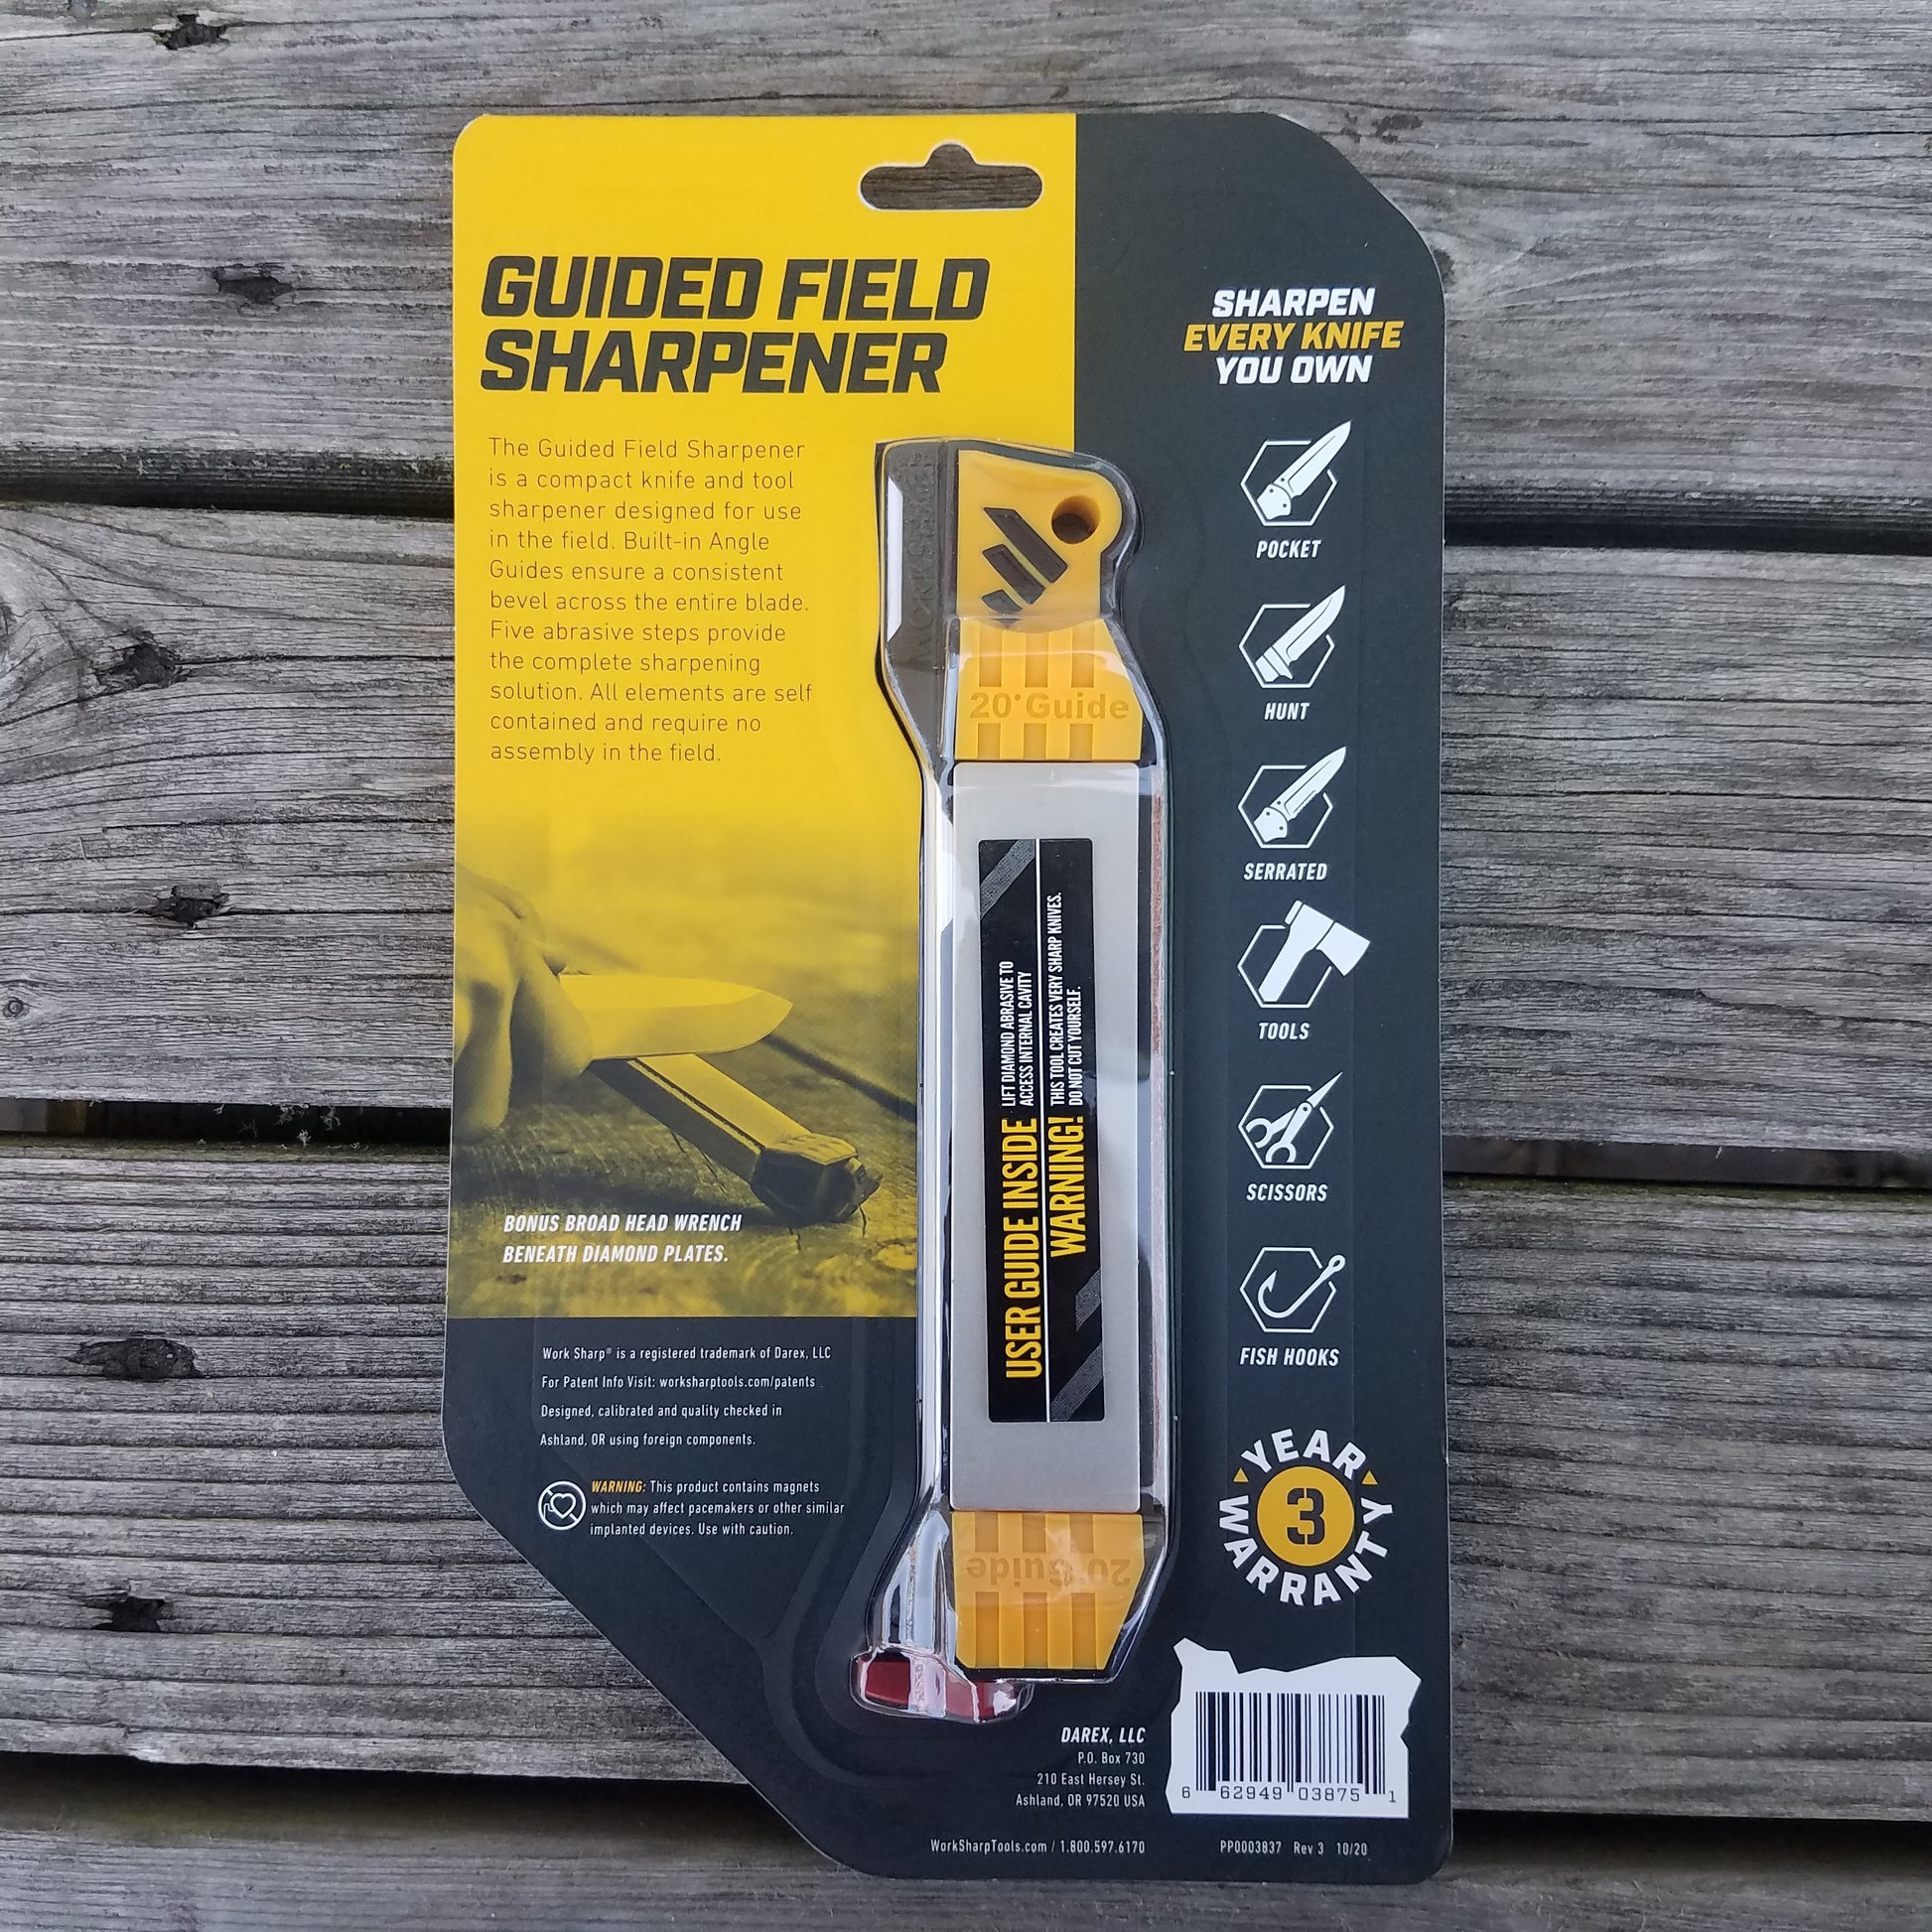 Is the Worksharp guided field sharpener good as a beginner for a complete blade  sharpener ? If not, write other better choices under 30/50 € in the  comments below. (Explained in the comments) : r/BudgetBlades